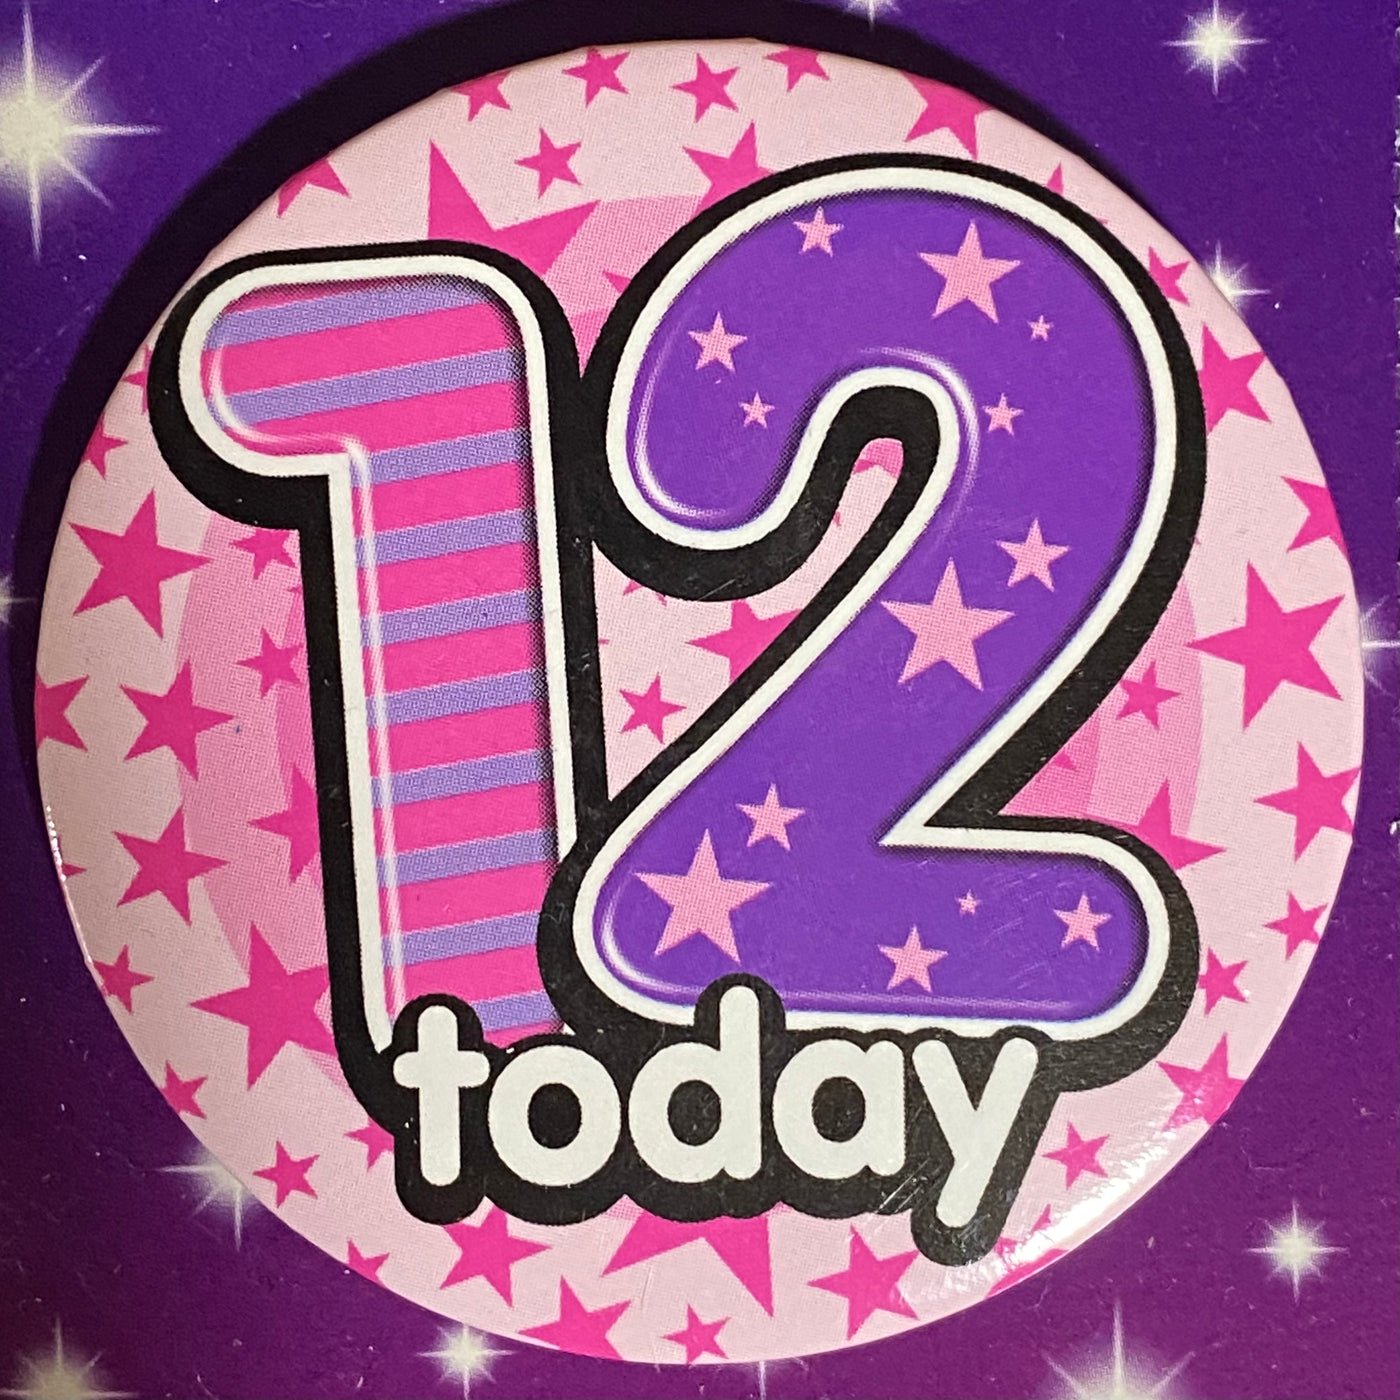 12 Today Pink Stars Badge